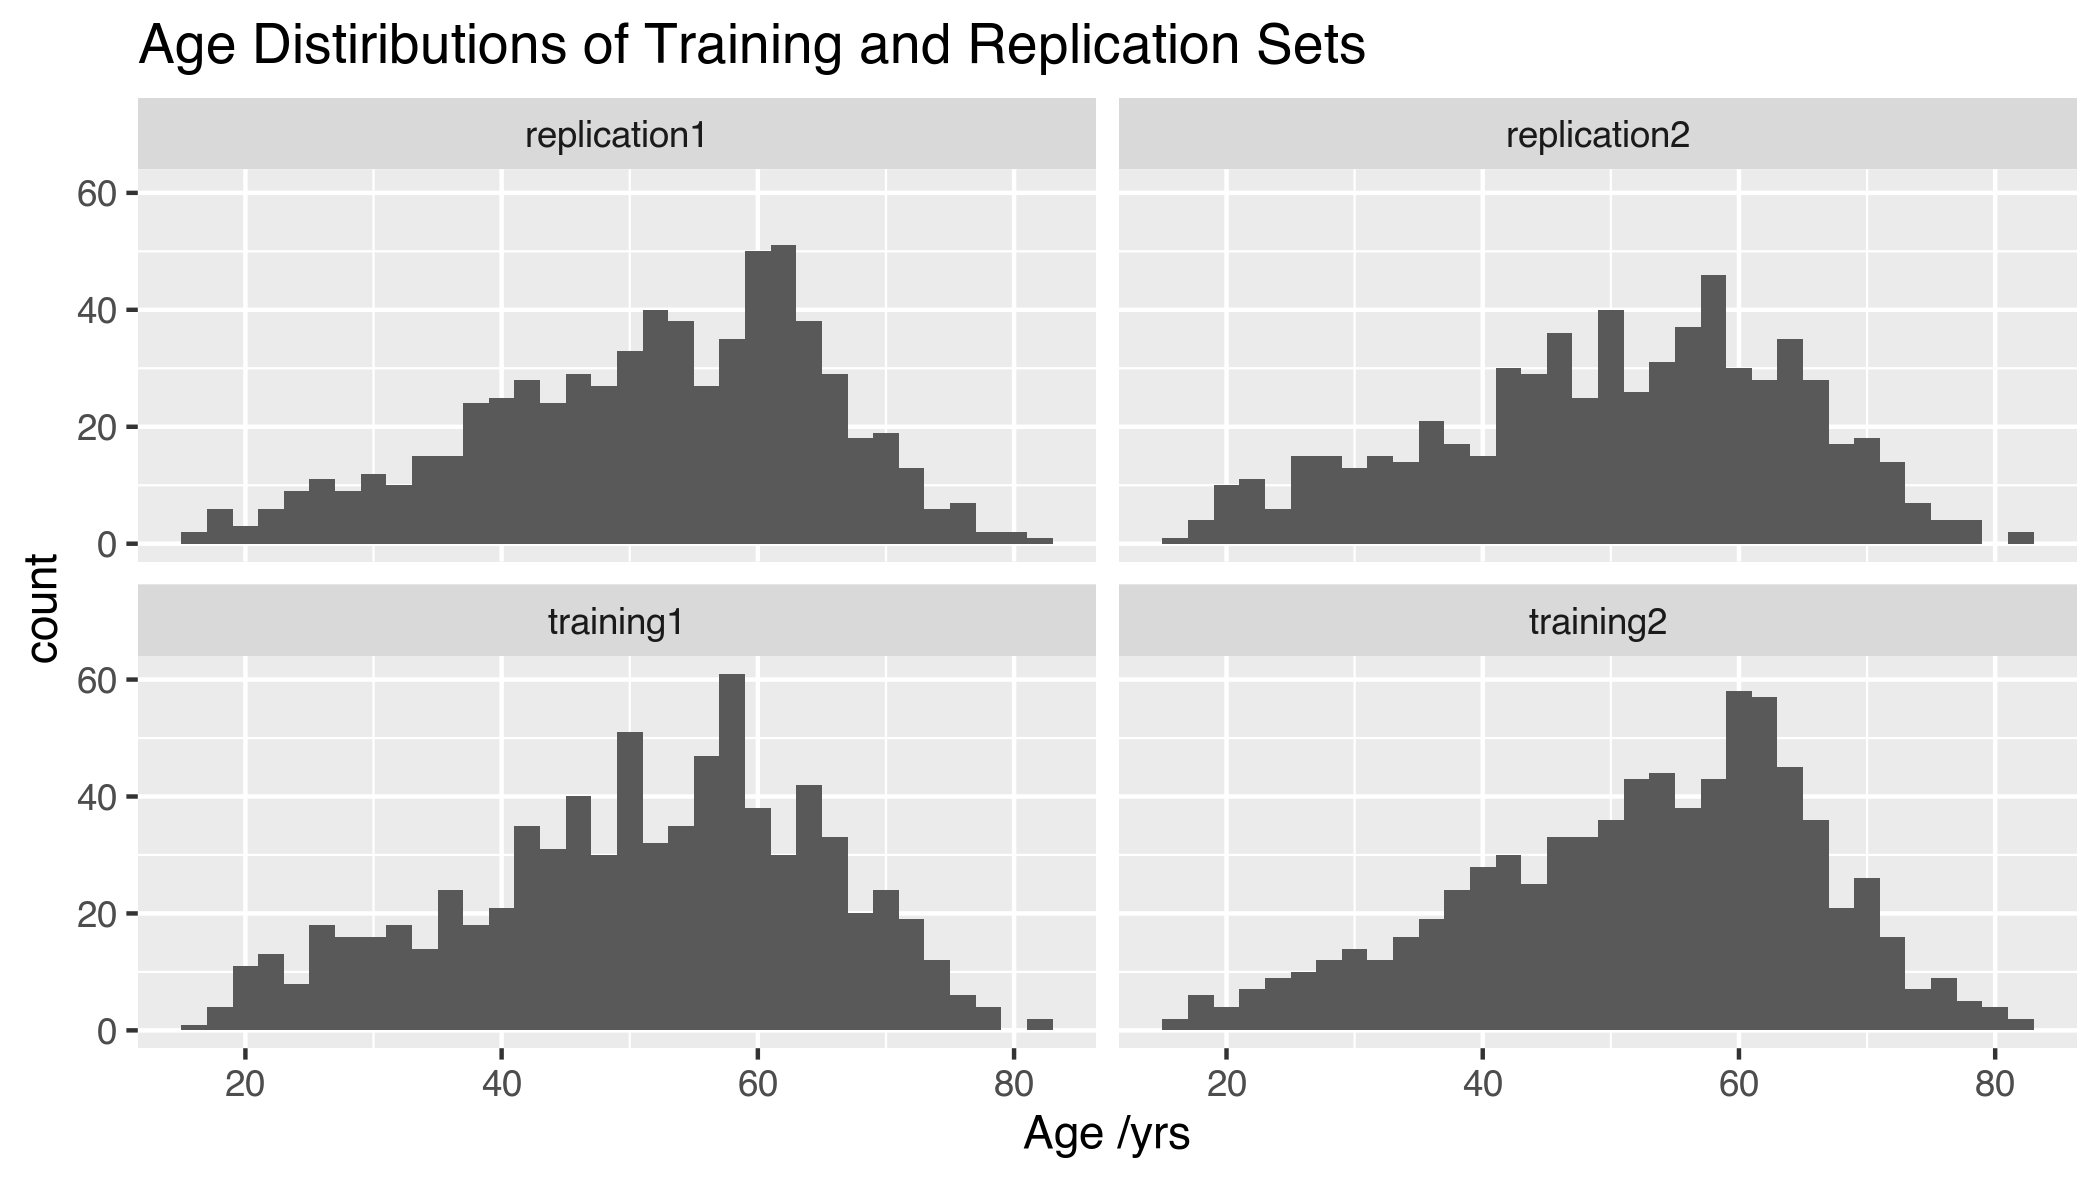 Age distribution of training and replication sets Training 1 (n = 774, 64M/710F); Training 2 (n = 774, 65M/709F); Replication 1 (n = 664, 55M/609F), unrelated to Training 1; Replication 2 (n = 644, 55M/589F), unrelated to Training 2. M = Male, F = Female